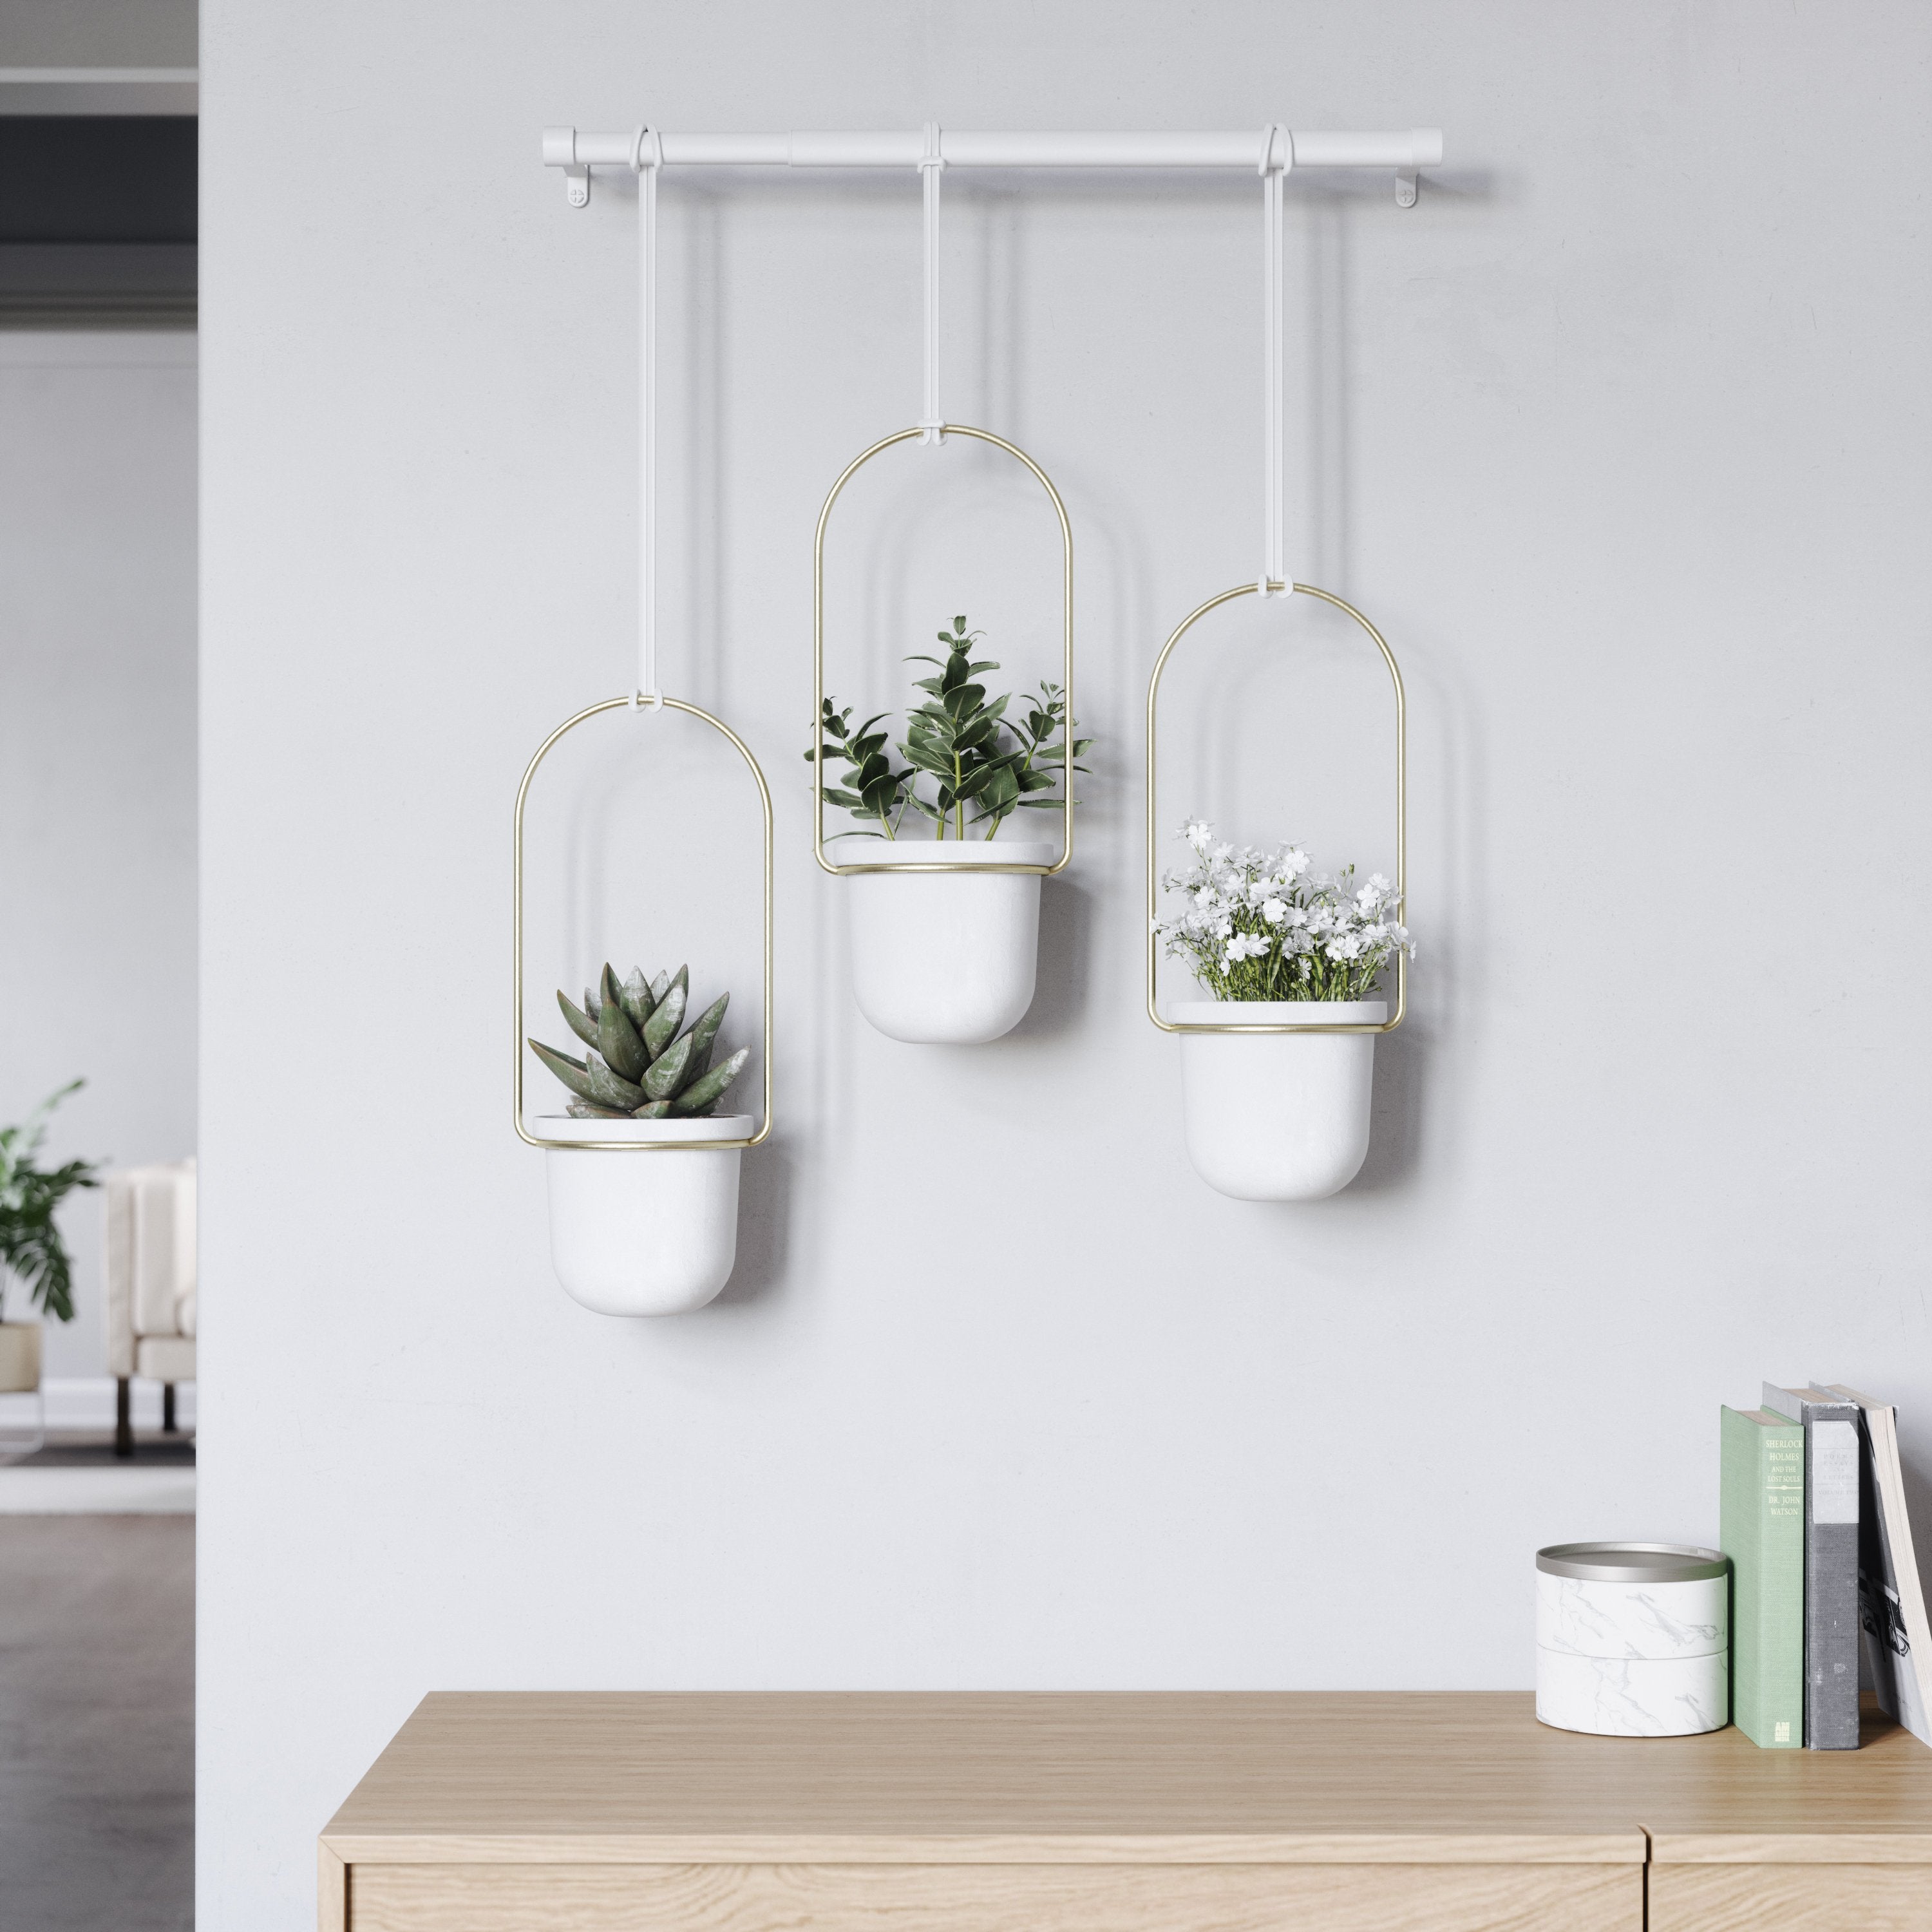 Shift Triflora Hanging Planters and Rod -